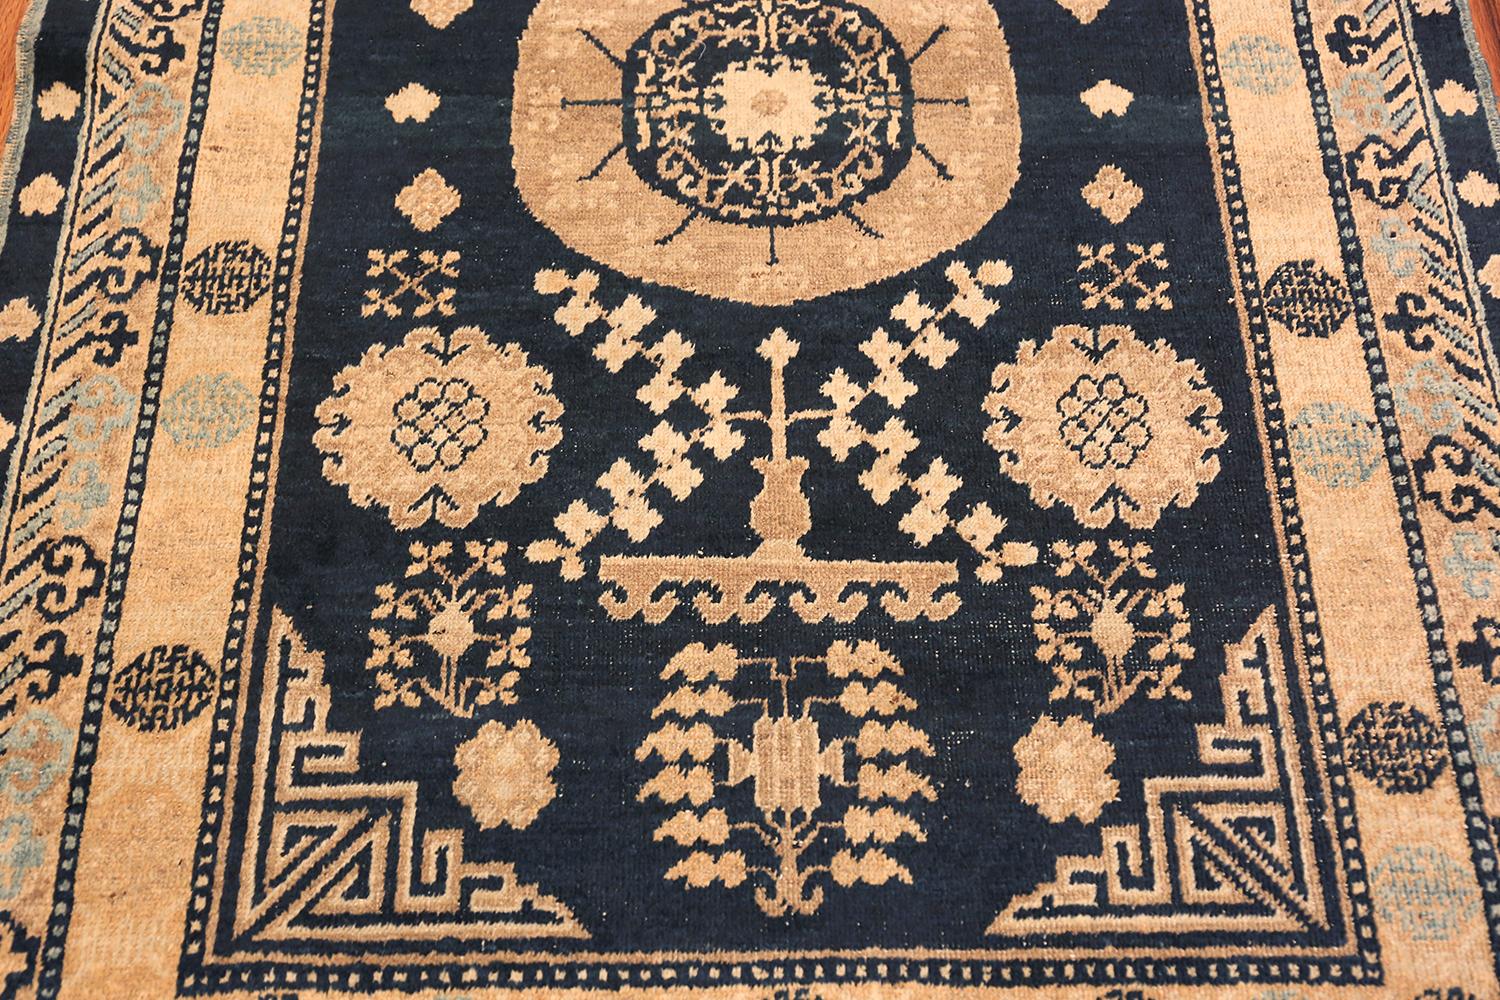 Beautiful small blue background antique Khotan rug, origin: East Turkestan, circa 1920. Size: 3 ft 4 in x 5 ft 6 in (1.02 m x 1.68 m). Khotan is a city in East Turkestan that was once at the crossroads of trade. People of many cultures passed